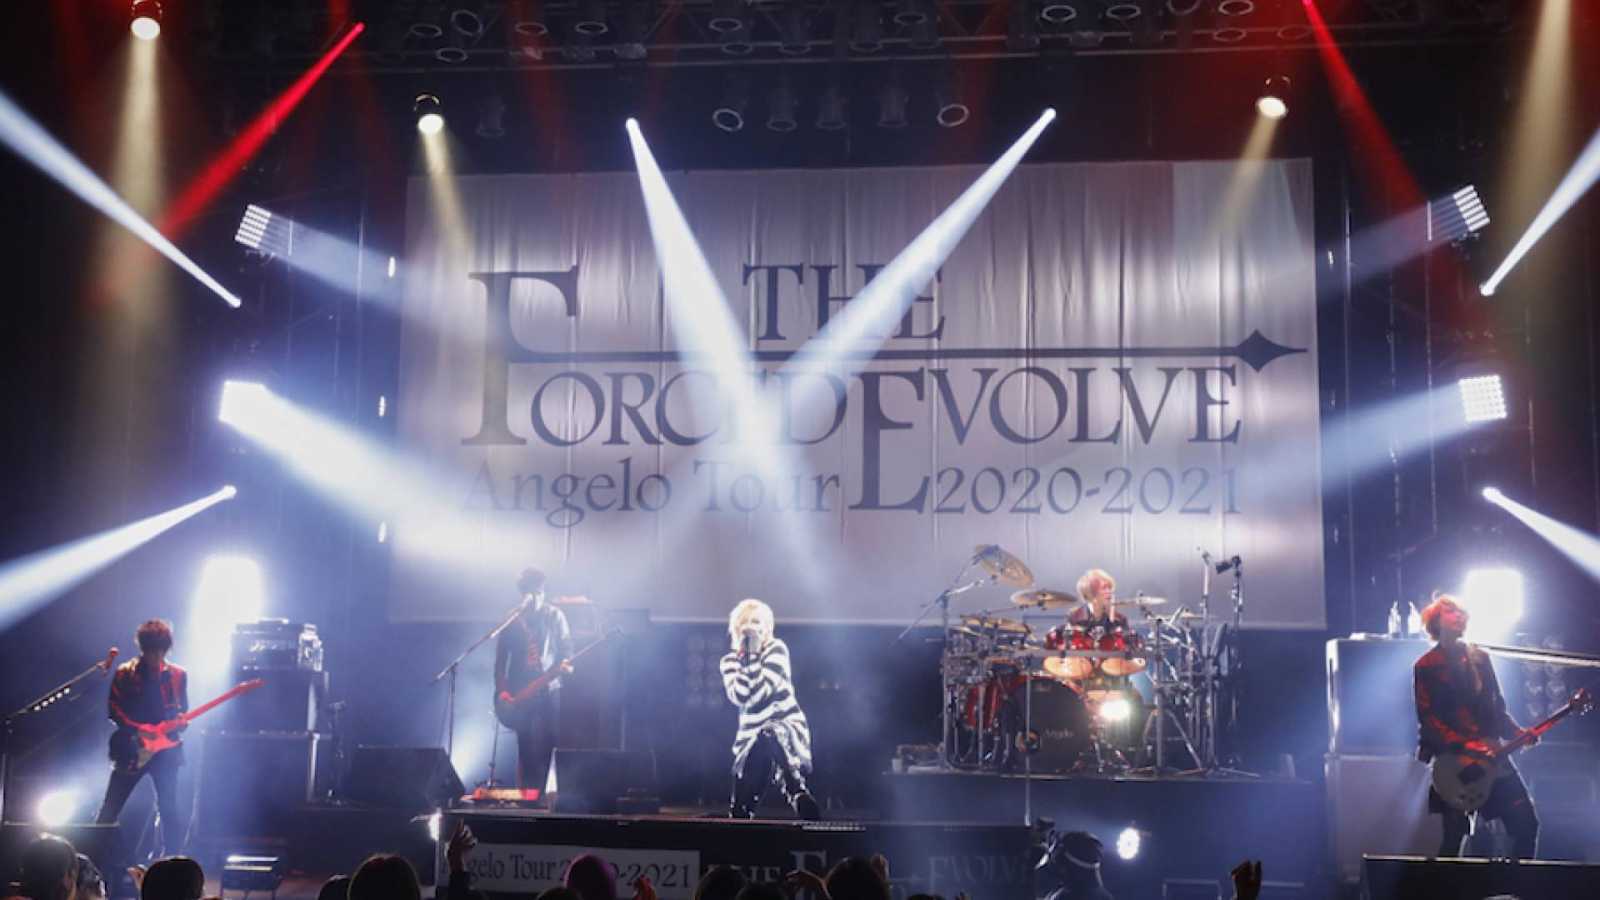 Angelo Tour 2020-2021「THE FORCED EVOLVE」  © Angelo. All rights reserved.